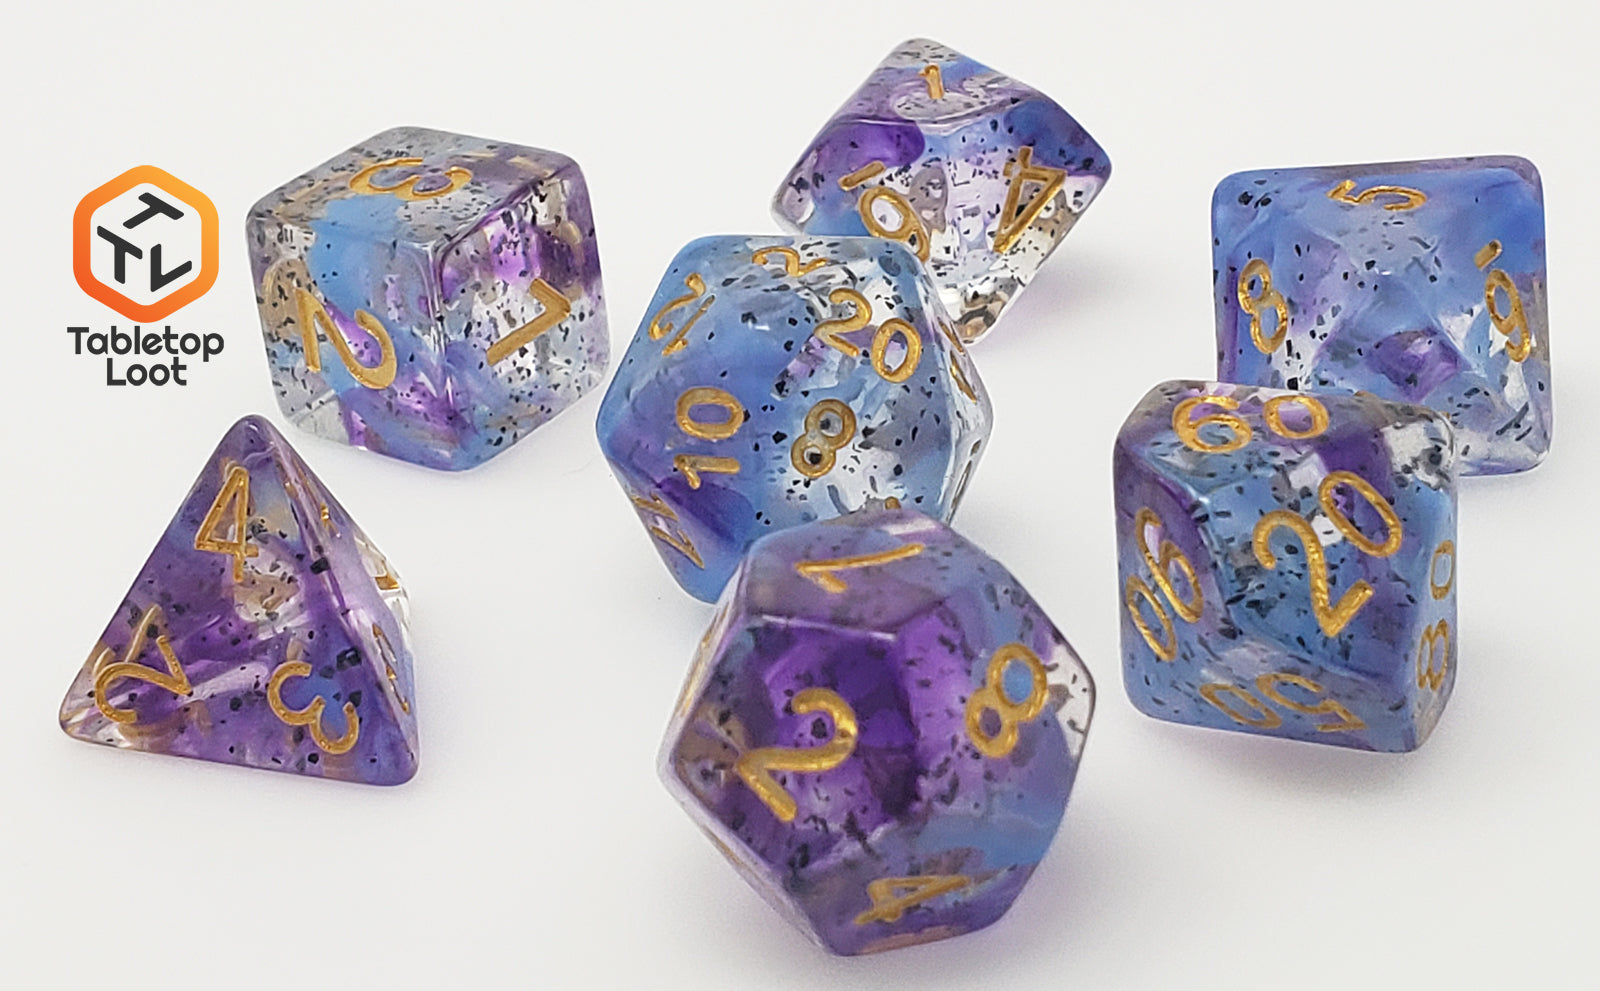 The Infestation 7 piece dice set from Tabletop Loot with swirls of blue and purple and dark speckles suspended in a clear resin with gold numbering.